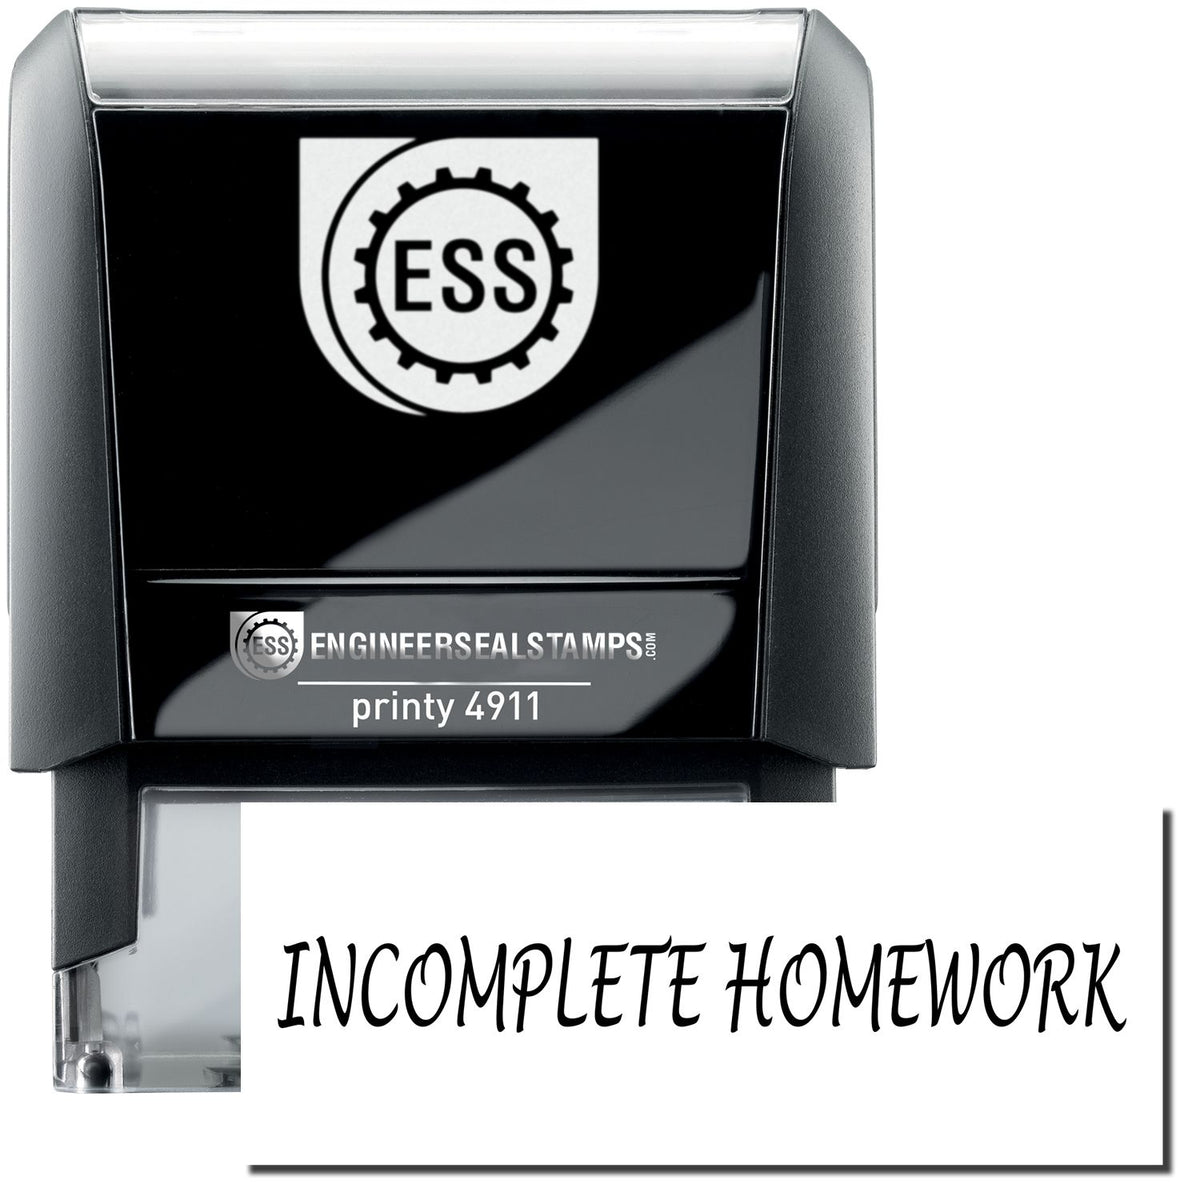 A self-inking stamp with a stamped image showing how the text &quot;INCOMPLETE HOMEWORK&quot; is displayed after stamping.